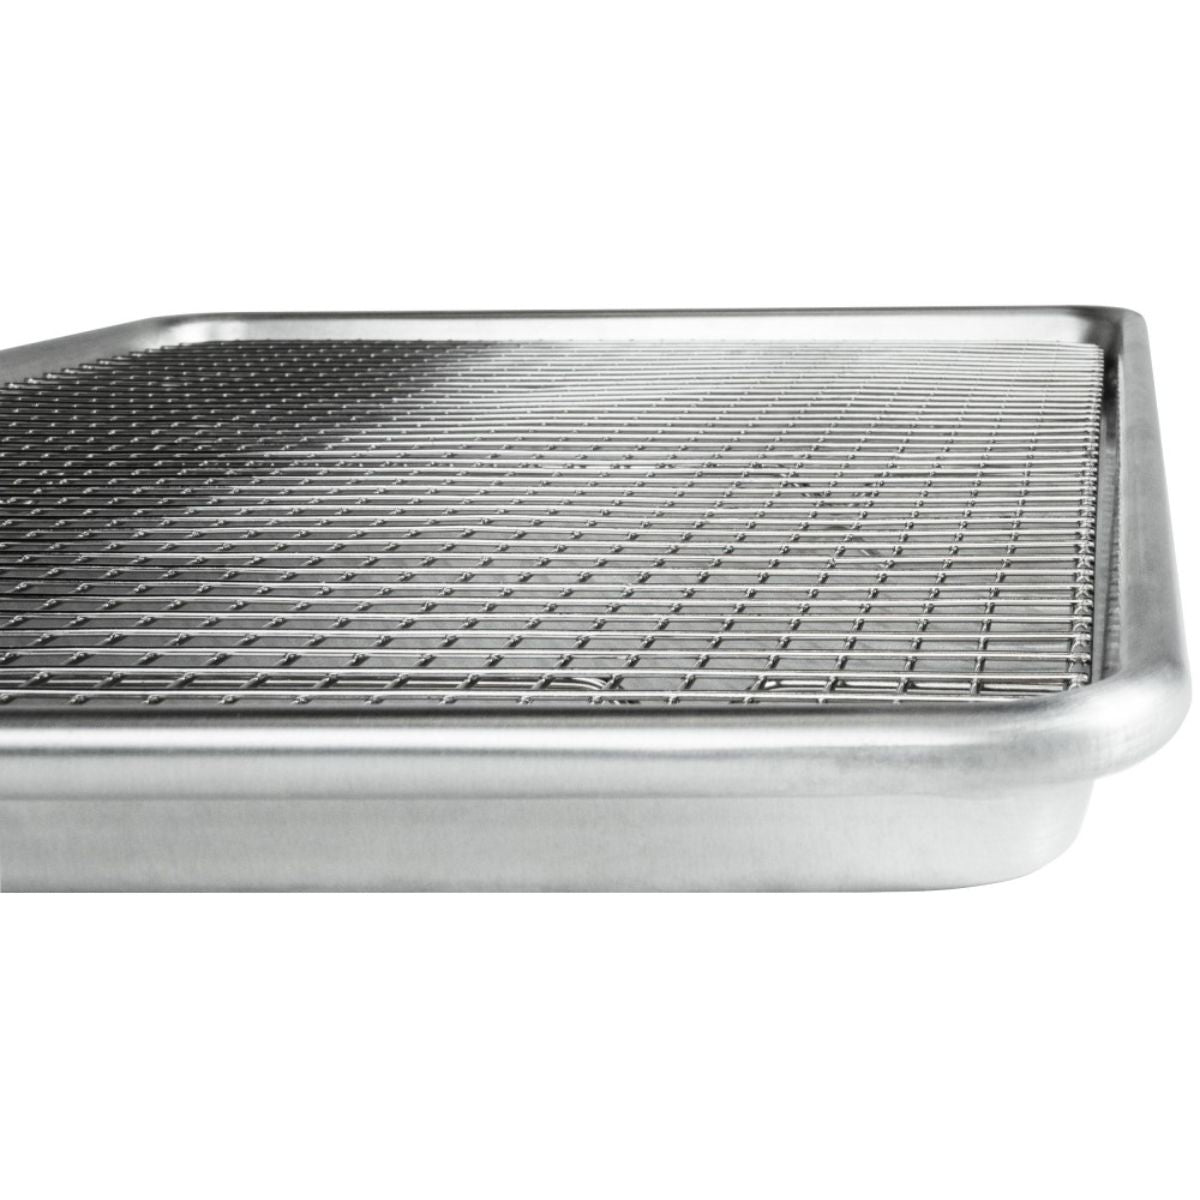 Fat Daddio's Cr-half Stainless Steel Cooling & Baking Rack, 12 x 17 inch